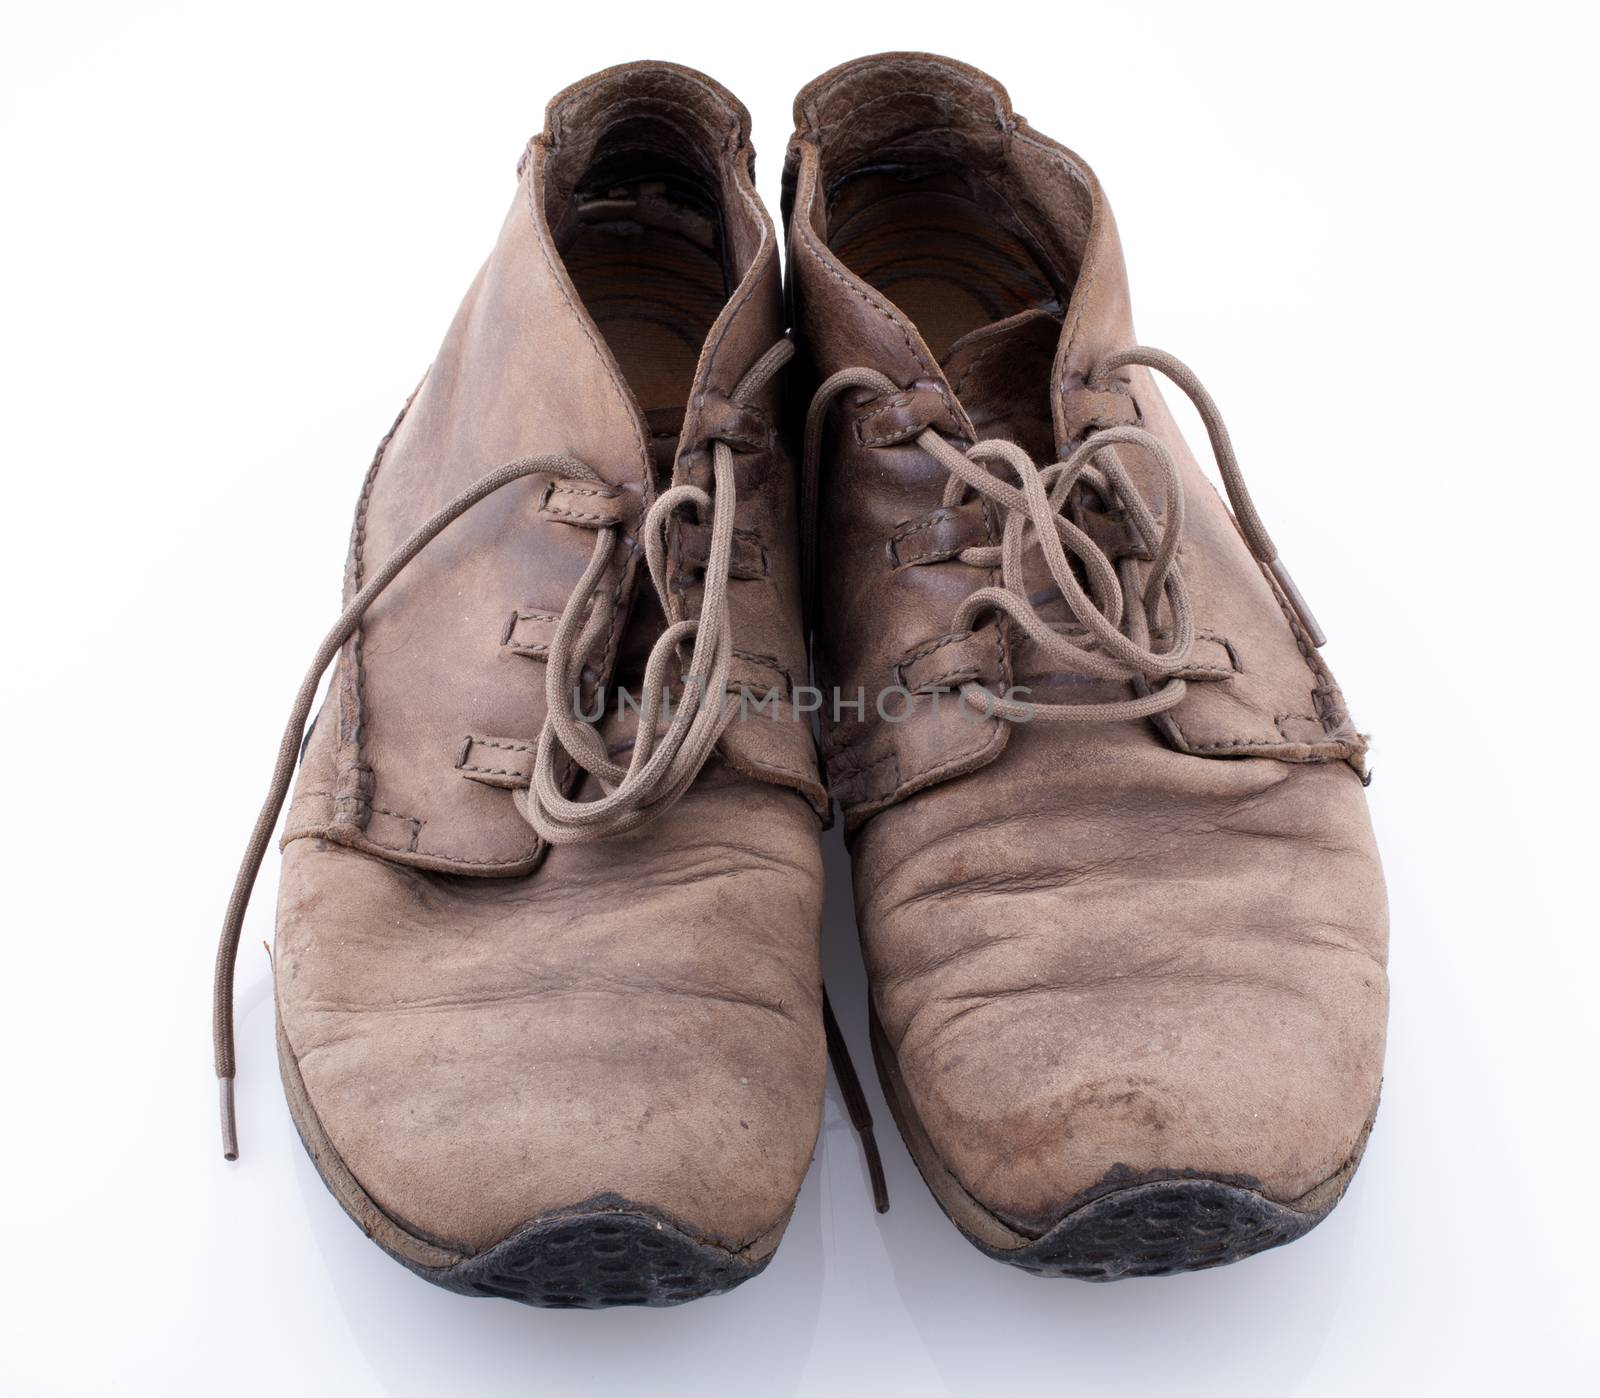 Old shoes isolated on white background by Portokalis